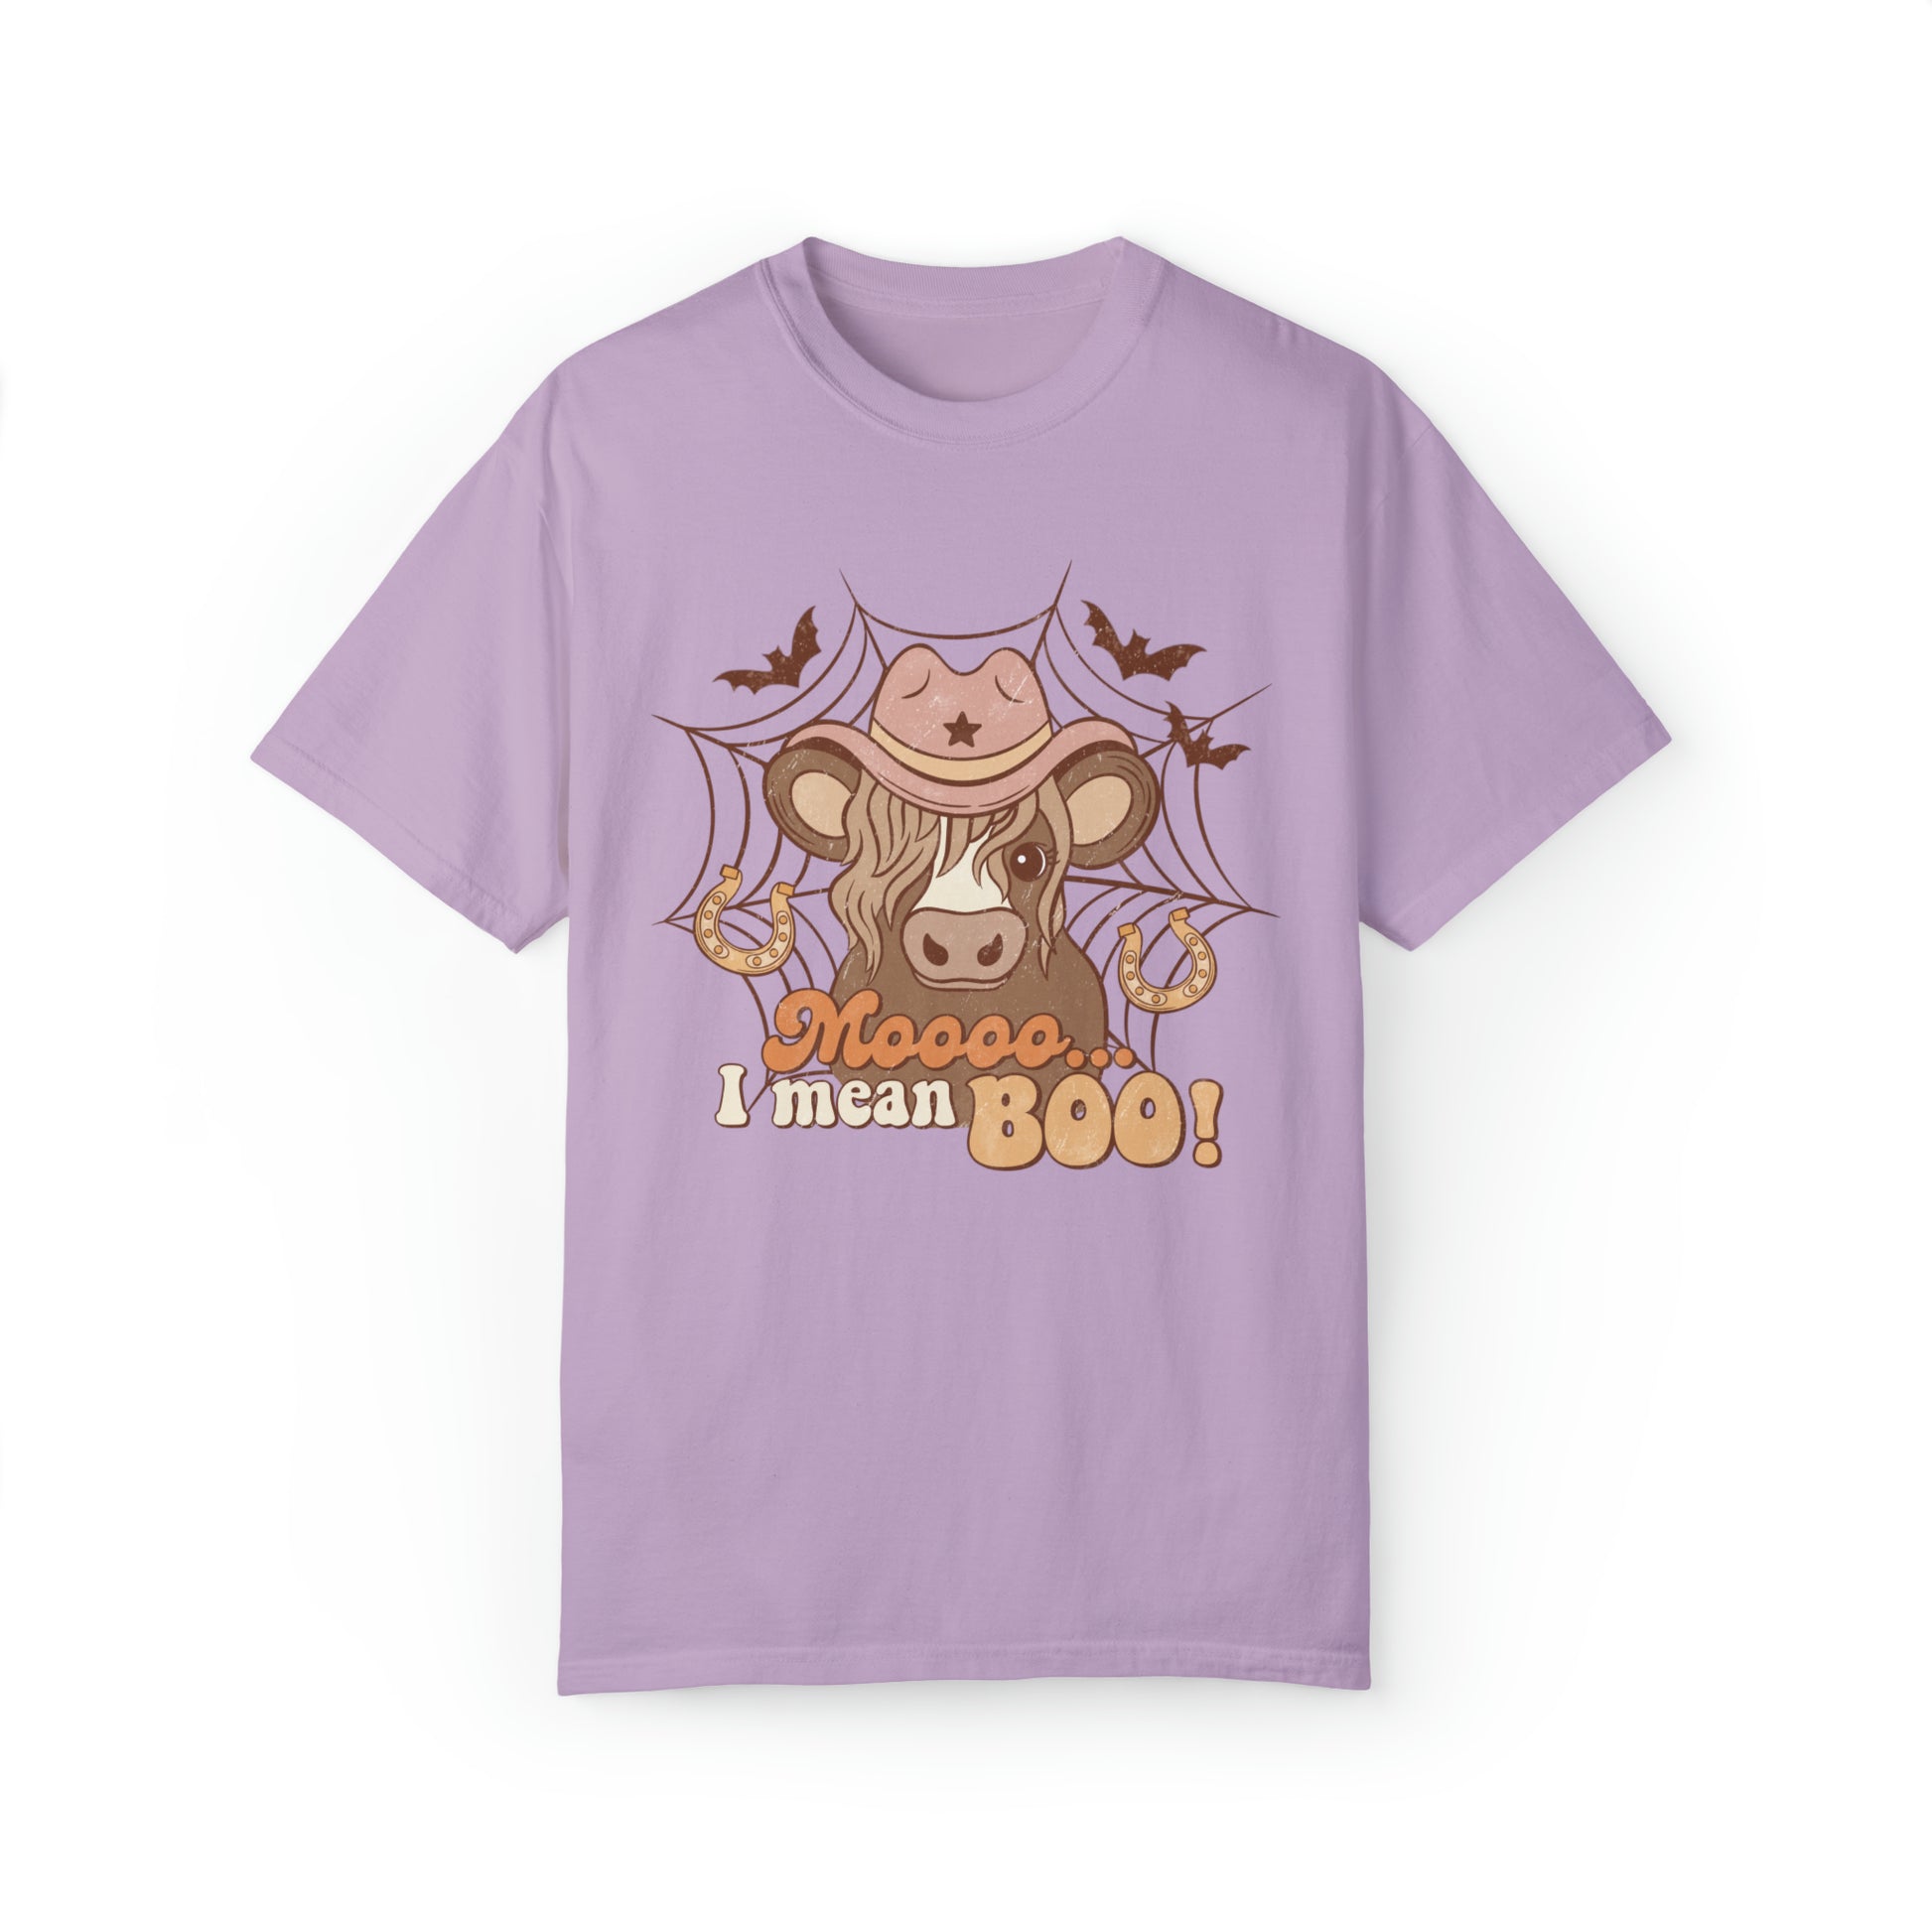 Moo, I mean Boo...Funny Cow Ghost Halloween Comfort Colors Shirt